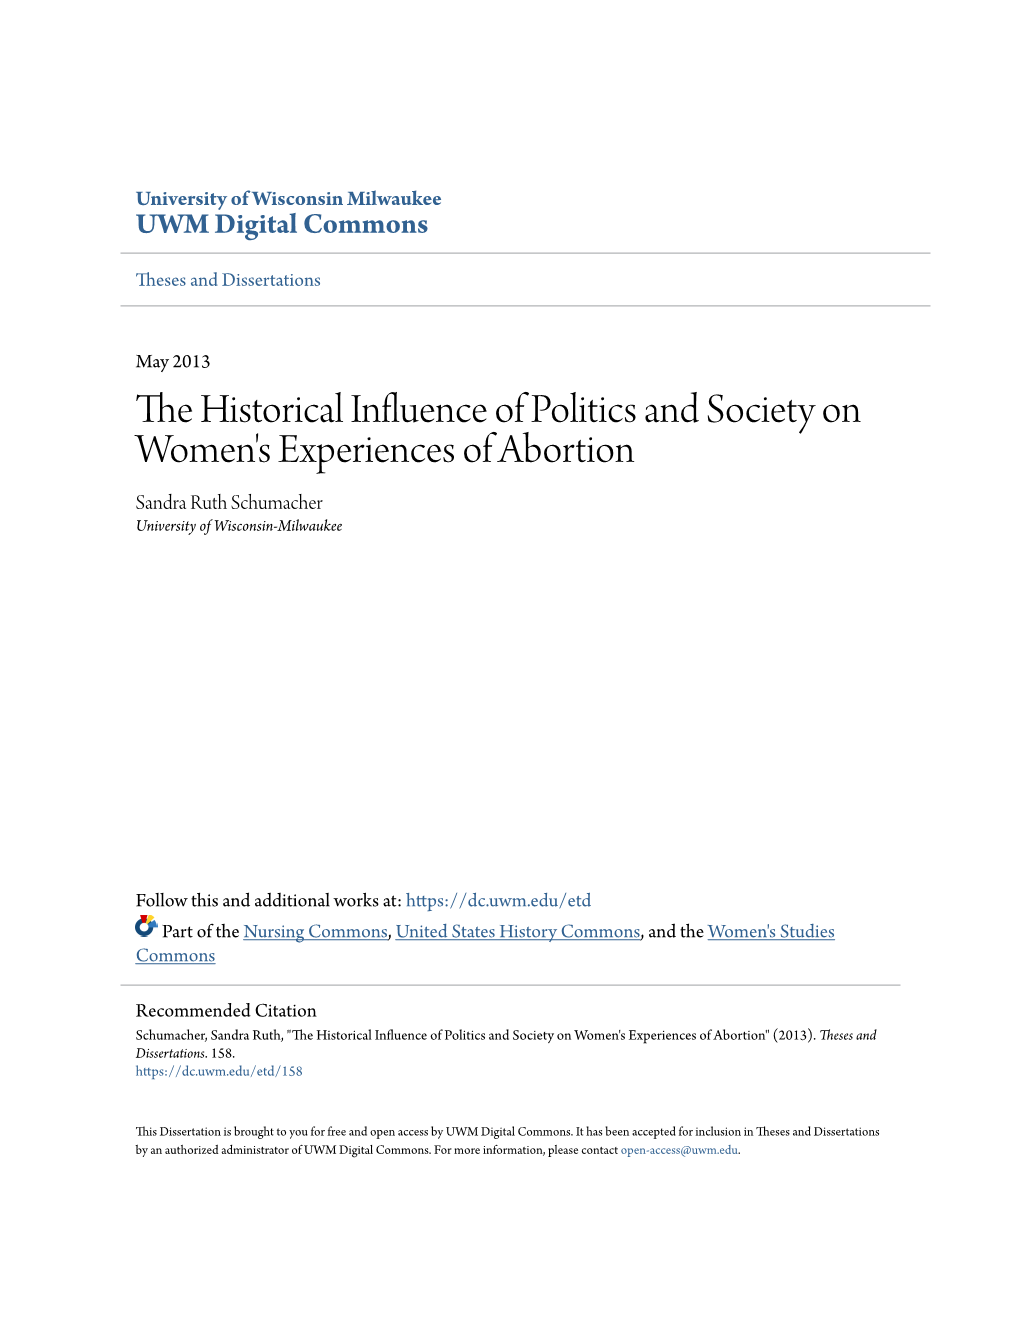 The Historical Influence of Politics and Society on Women's Experiences